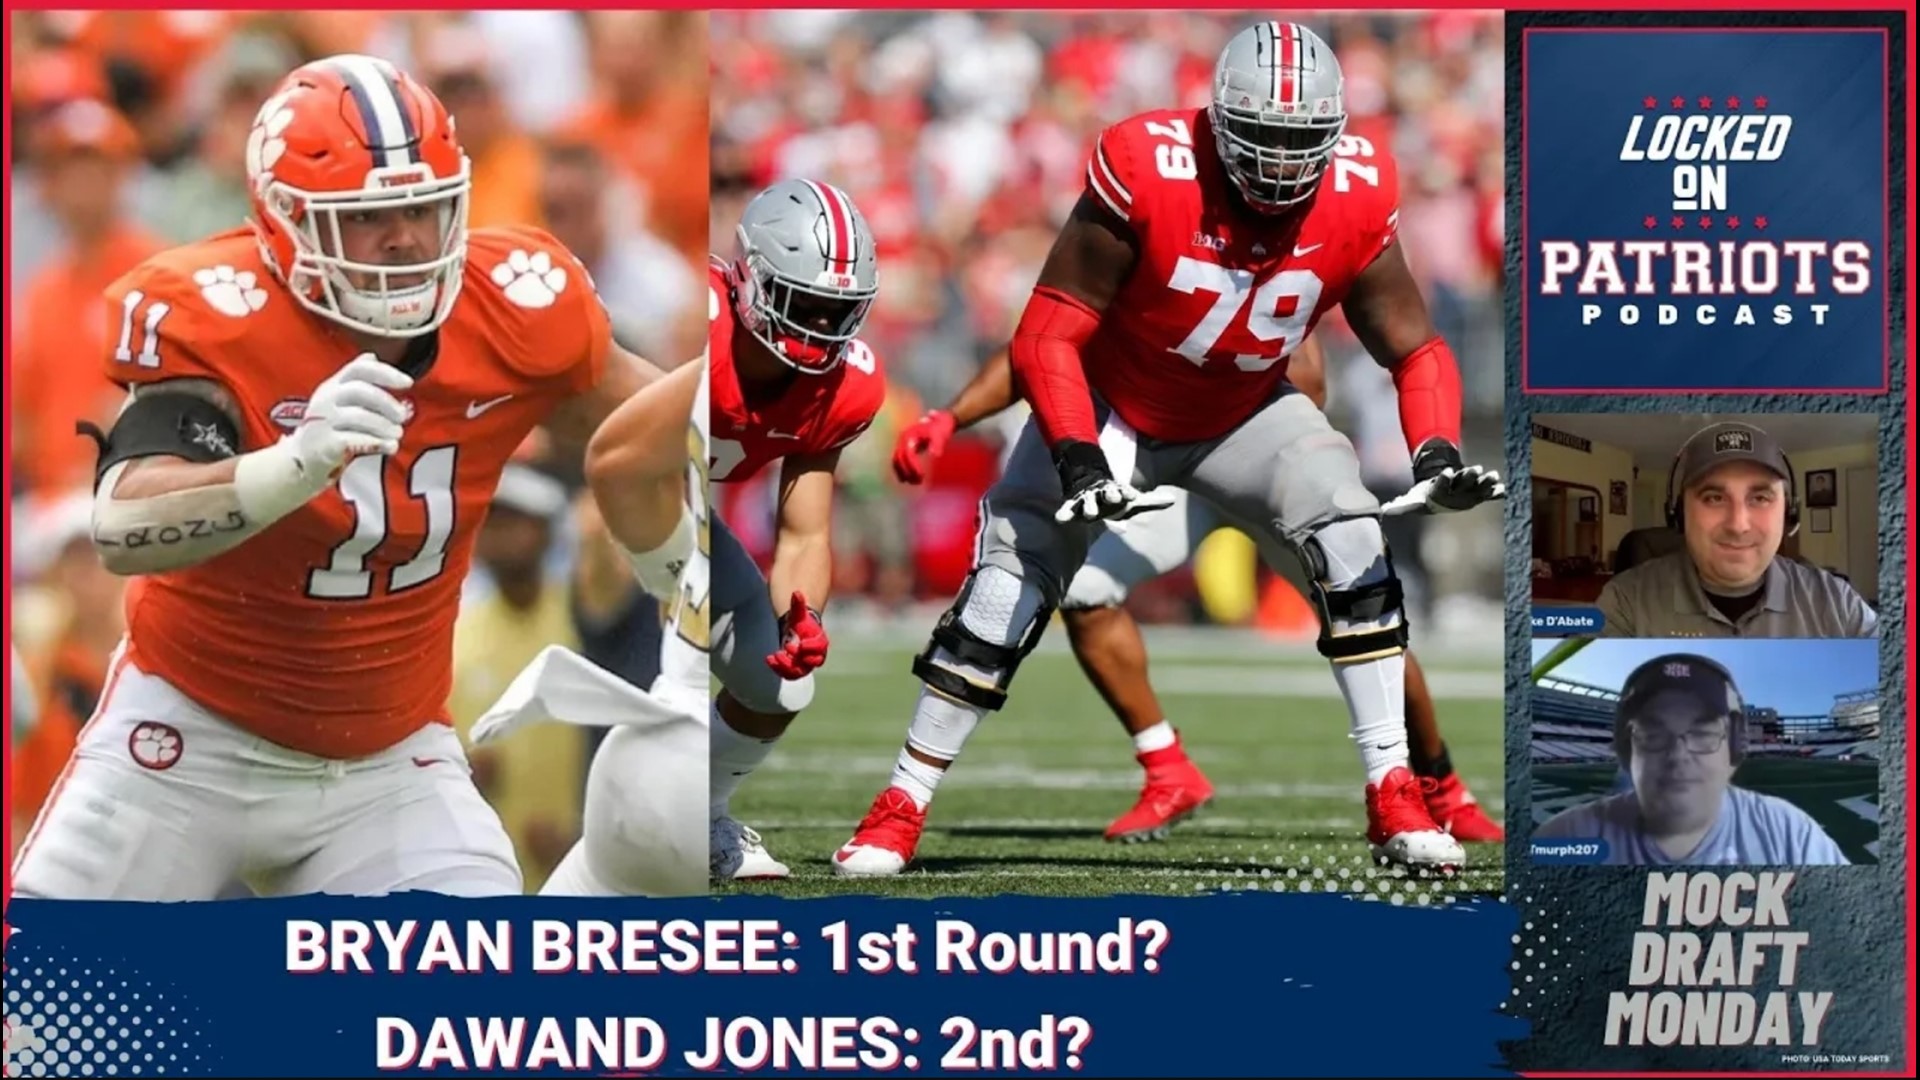 The New England Patriots defensive line would be bolstered by the addition of Clemson defensive lineman Bryan Bresee.